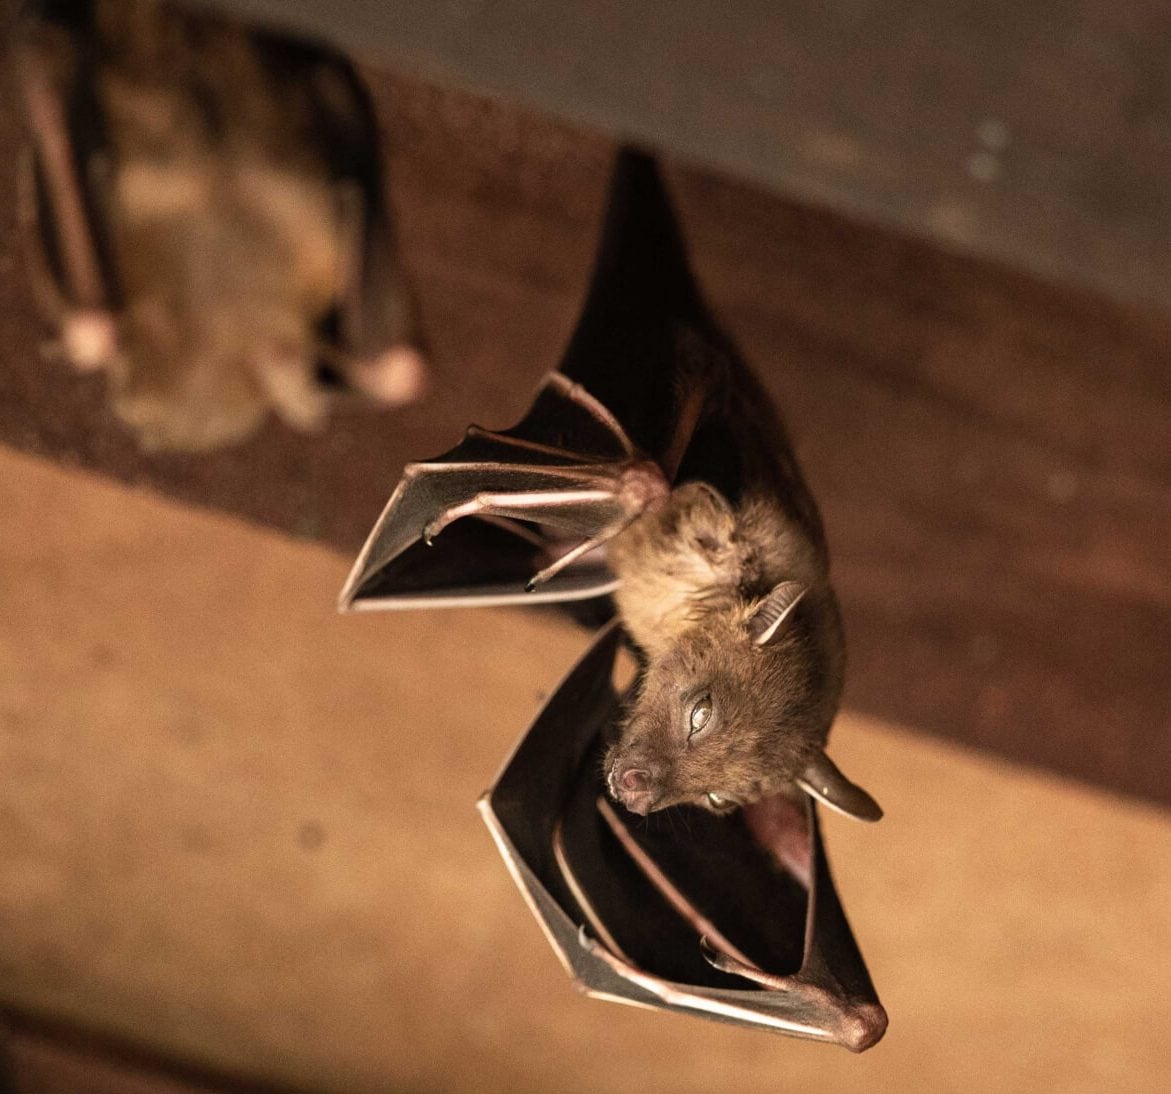 Expert bat removal services for a safe and humane solution in Milwaukee